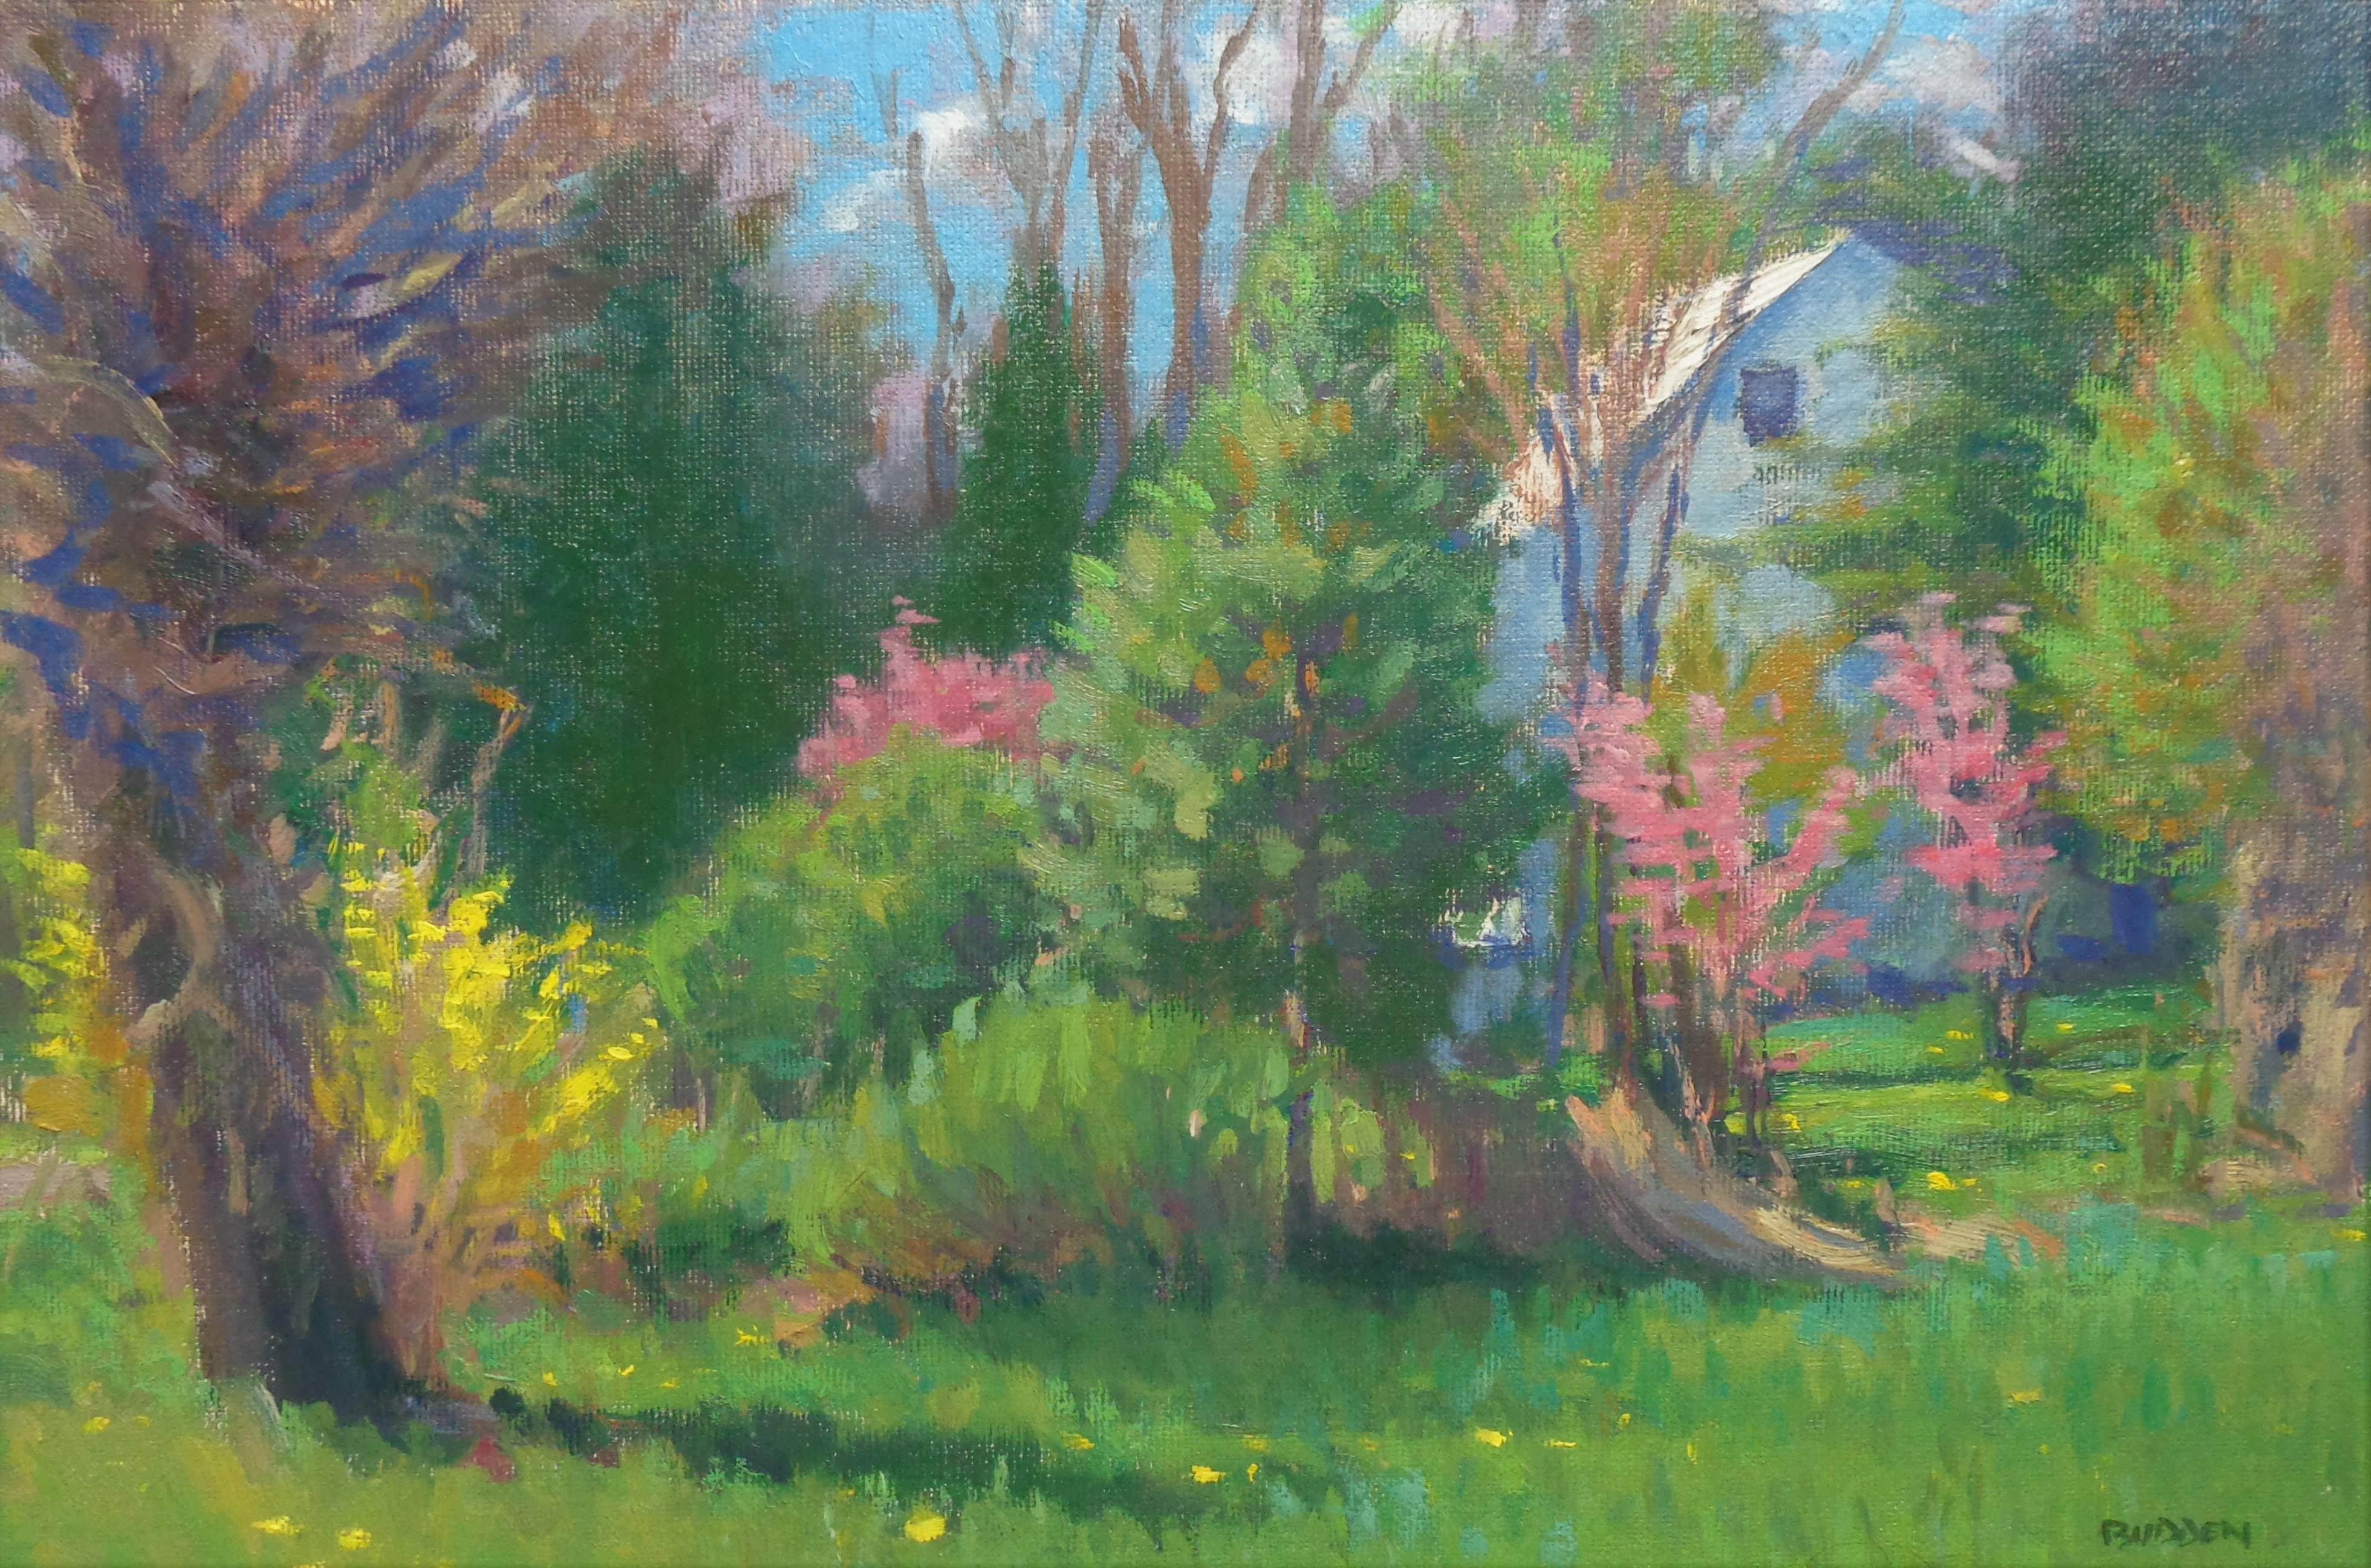 Early Spring is an oil painting on canvas panel that showcases the beautiful light of a spring day with flowering trees, etc. Painting is unframed.

ARTIST'S STATEMENT
I have been in the art business as an artist and dealer since the early 80's.